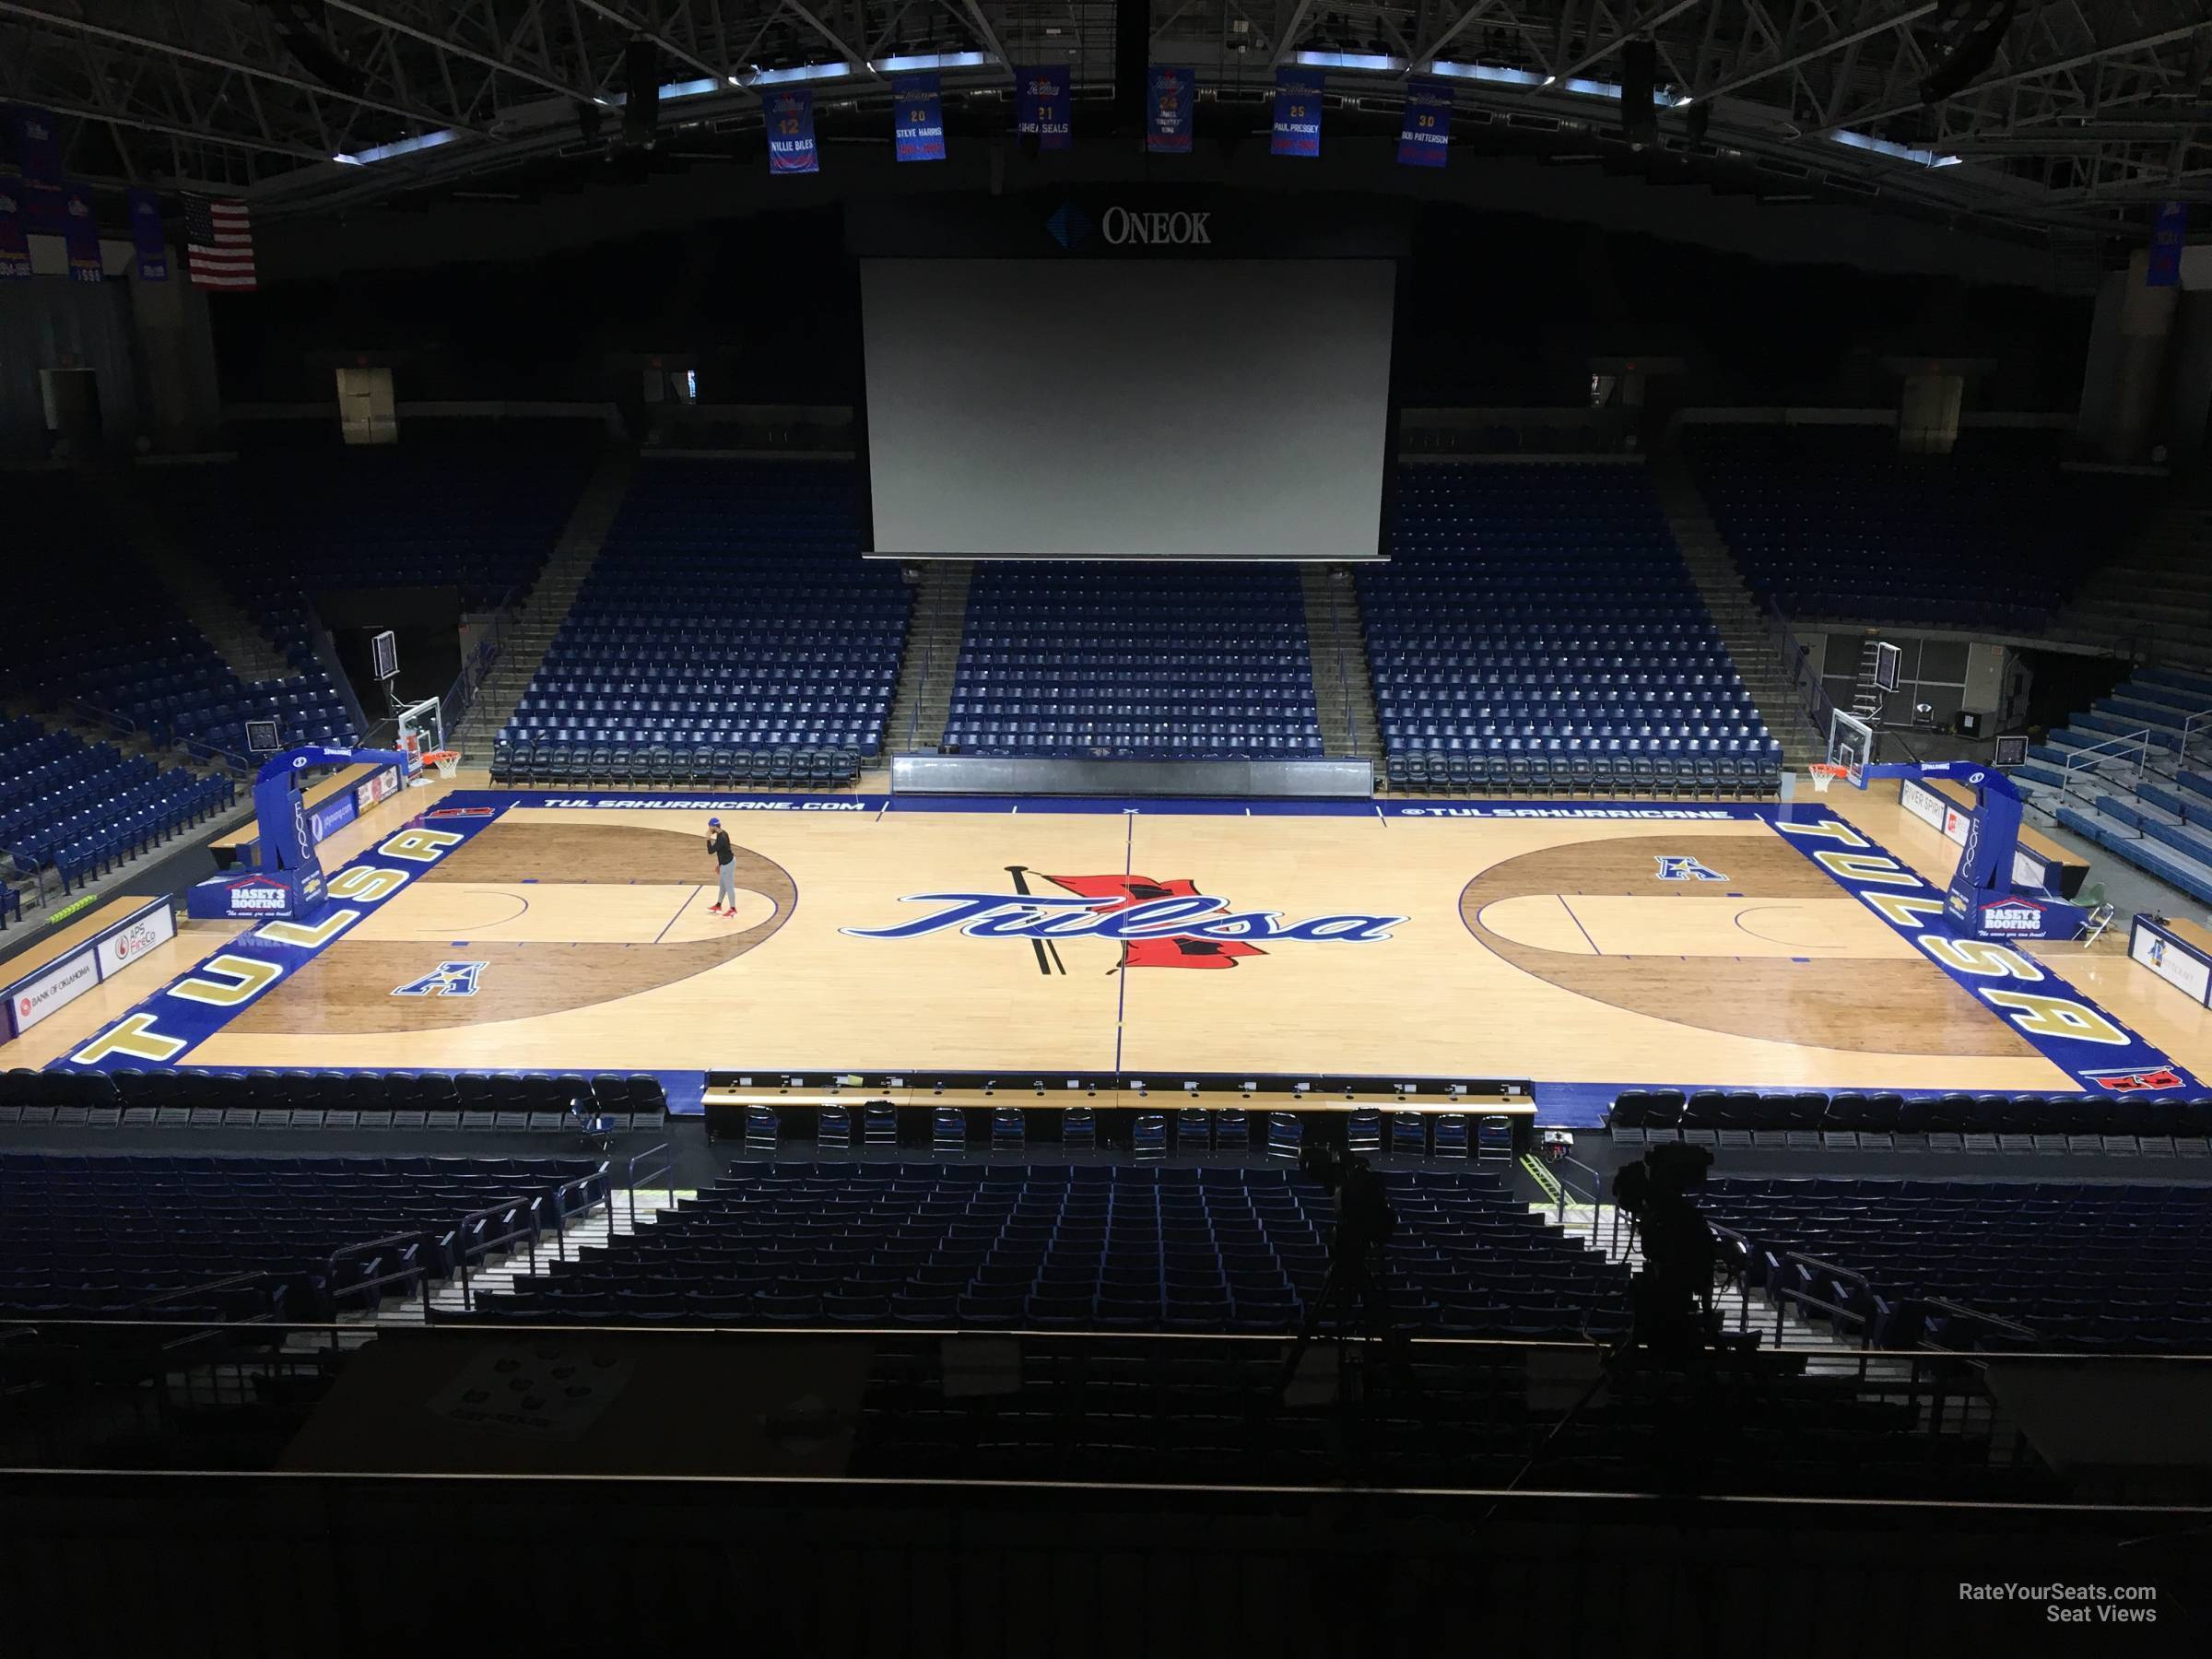 section 214, row d seat view  - reynolds center